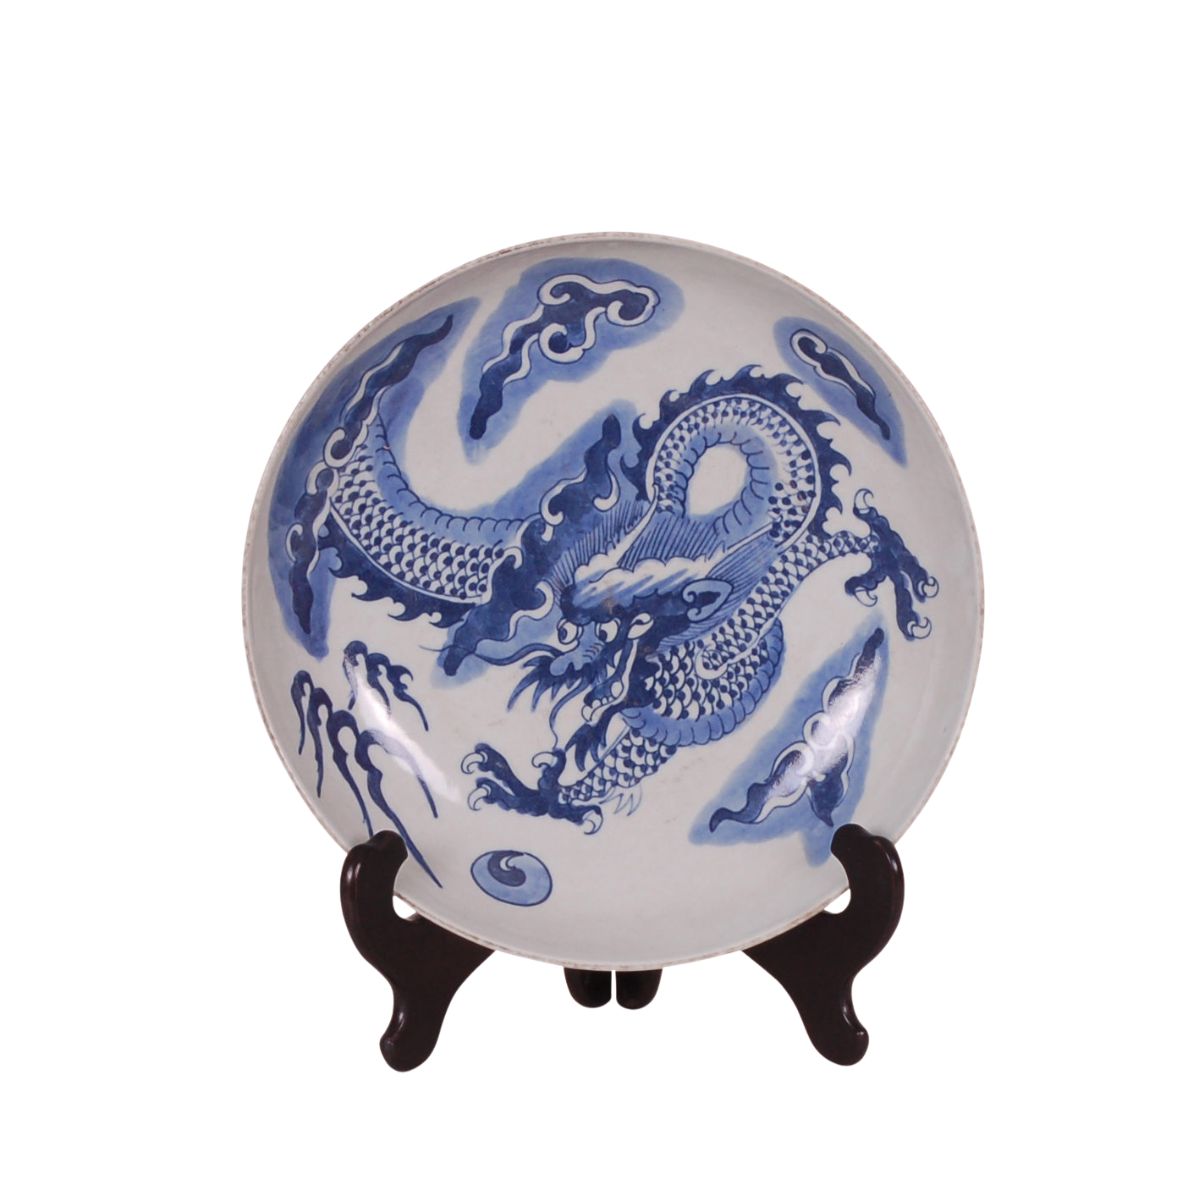 Classic Chinese Vintage Blue and White Floral Globe Porcelain Decorative  Vase